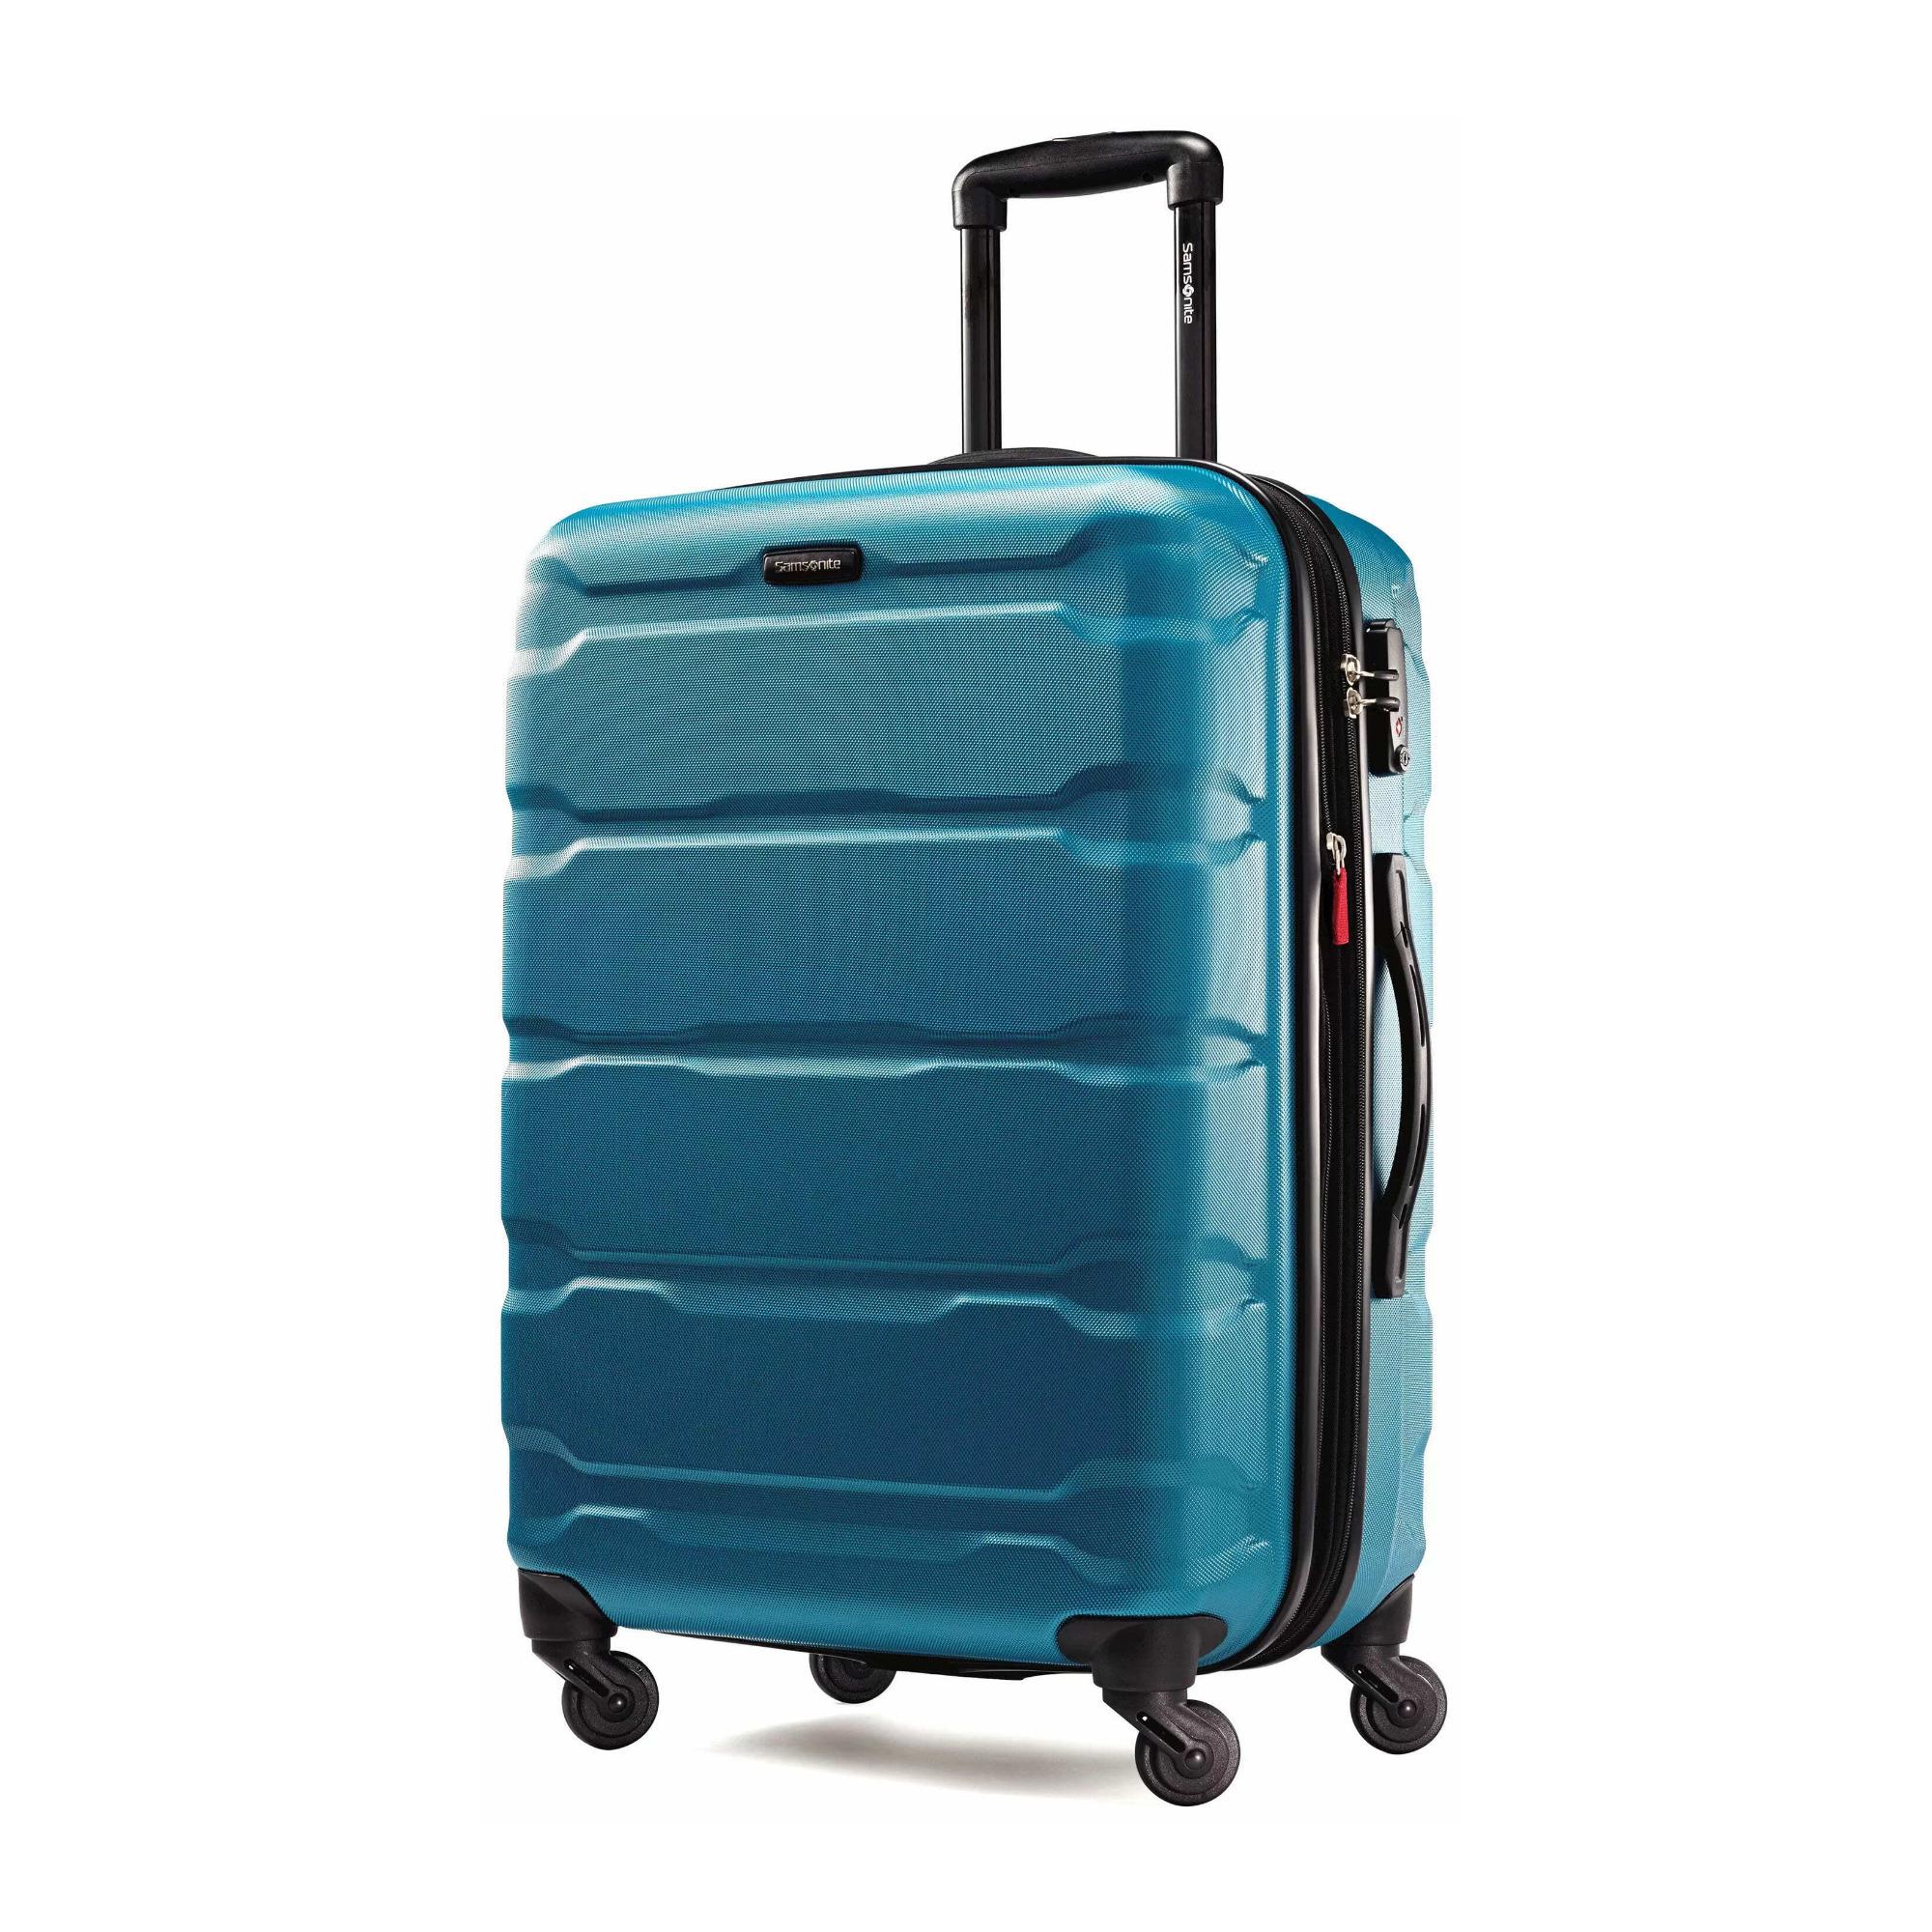 OMNI PC - Spinner 24 in - hardside - polycarbonate - caribbean blue - image 1 of 5